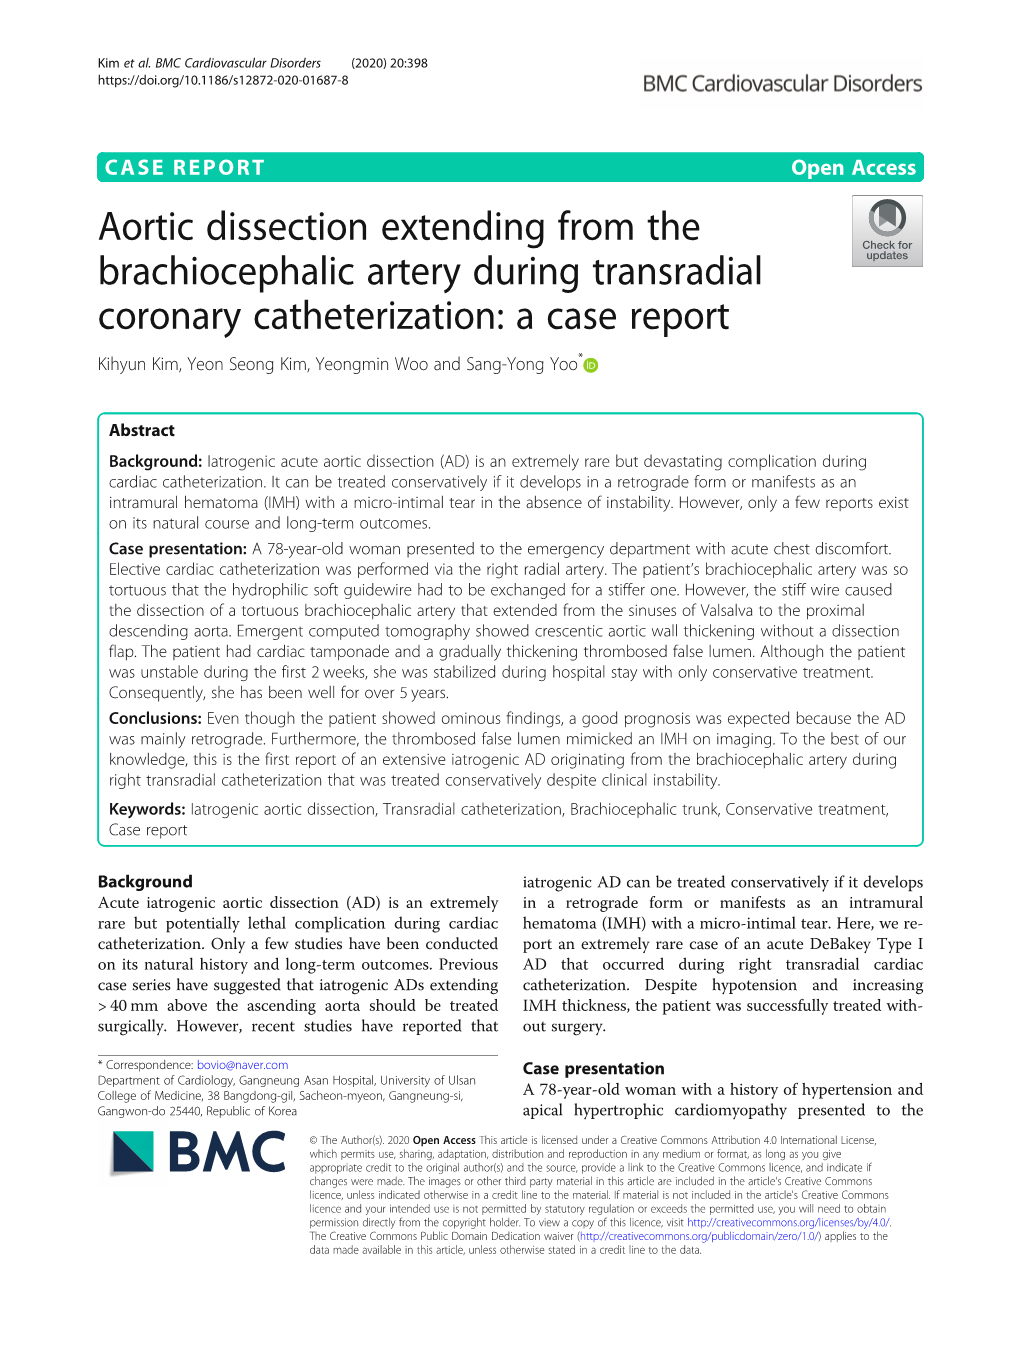 Aortic Dissection Extending from the Brachiocephalic Artery During